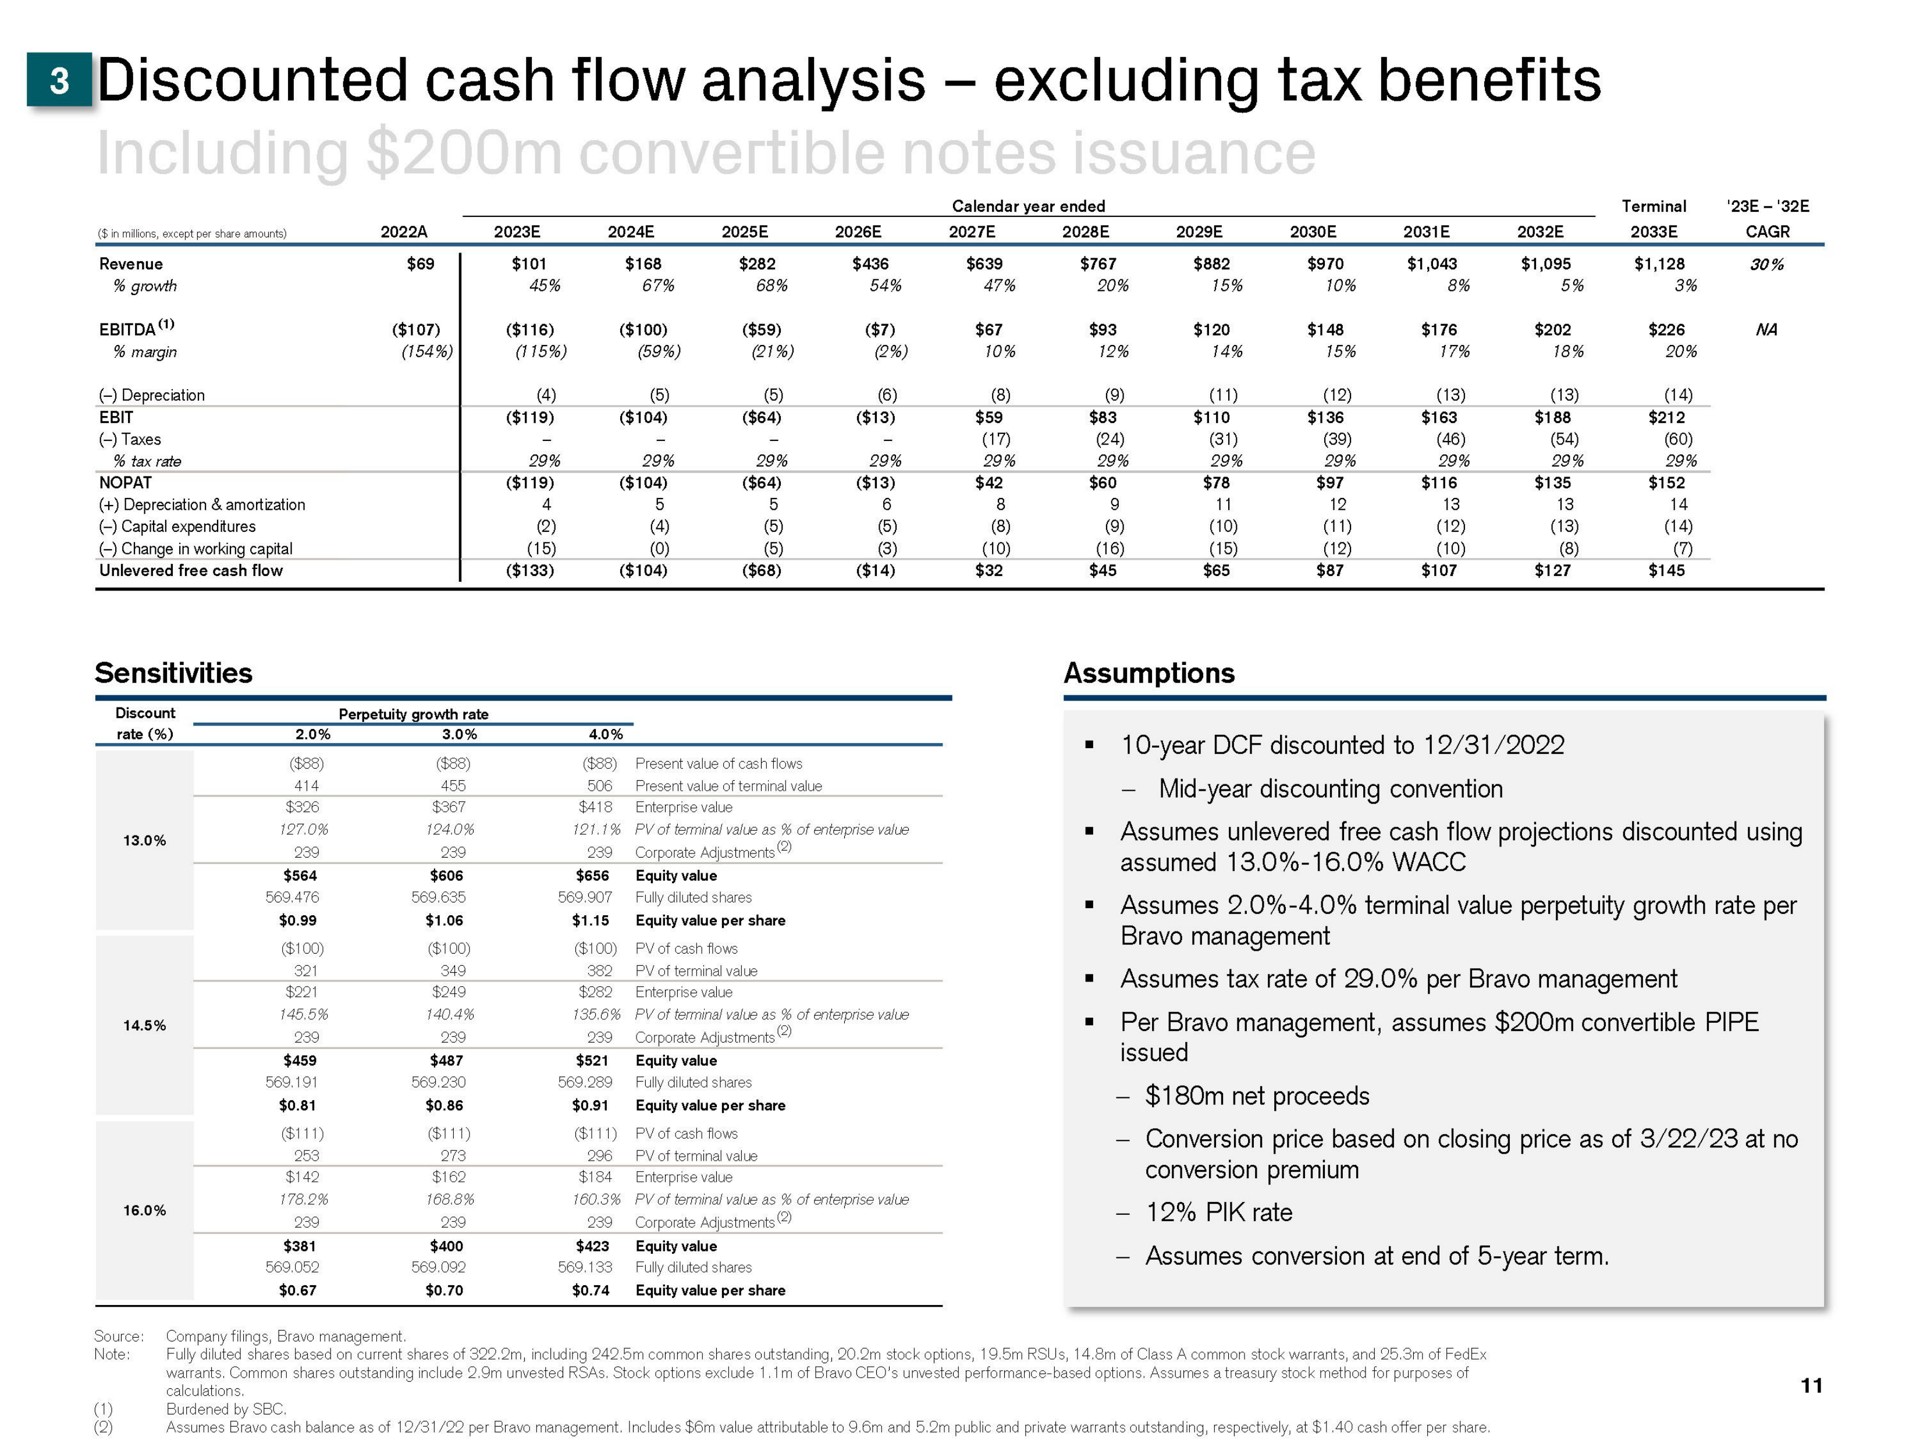 discounted cash flow analysis excluding tax benefits ears soe sao year discounted to terminal value assumed assumes terminal value perpetuity growth rate per assumes tax rate of per bravo management git conversion price based on closing price as of at no | Credit Suisse